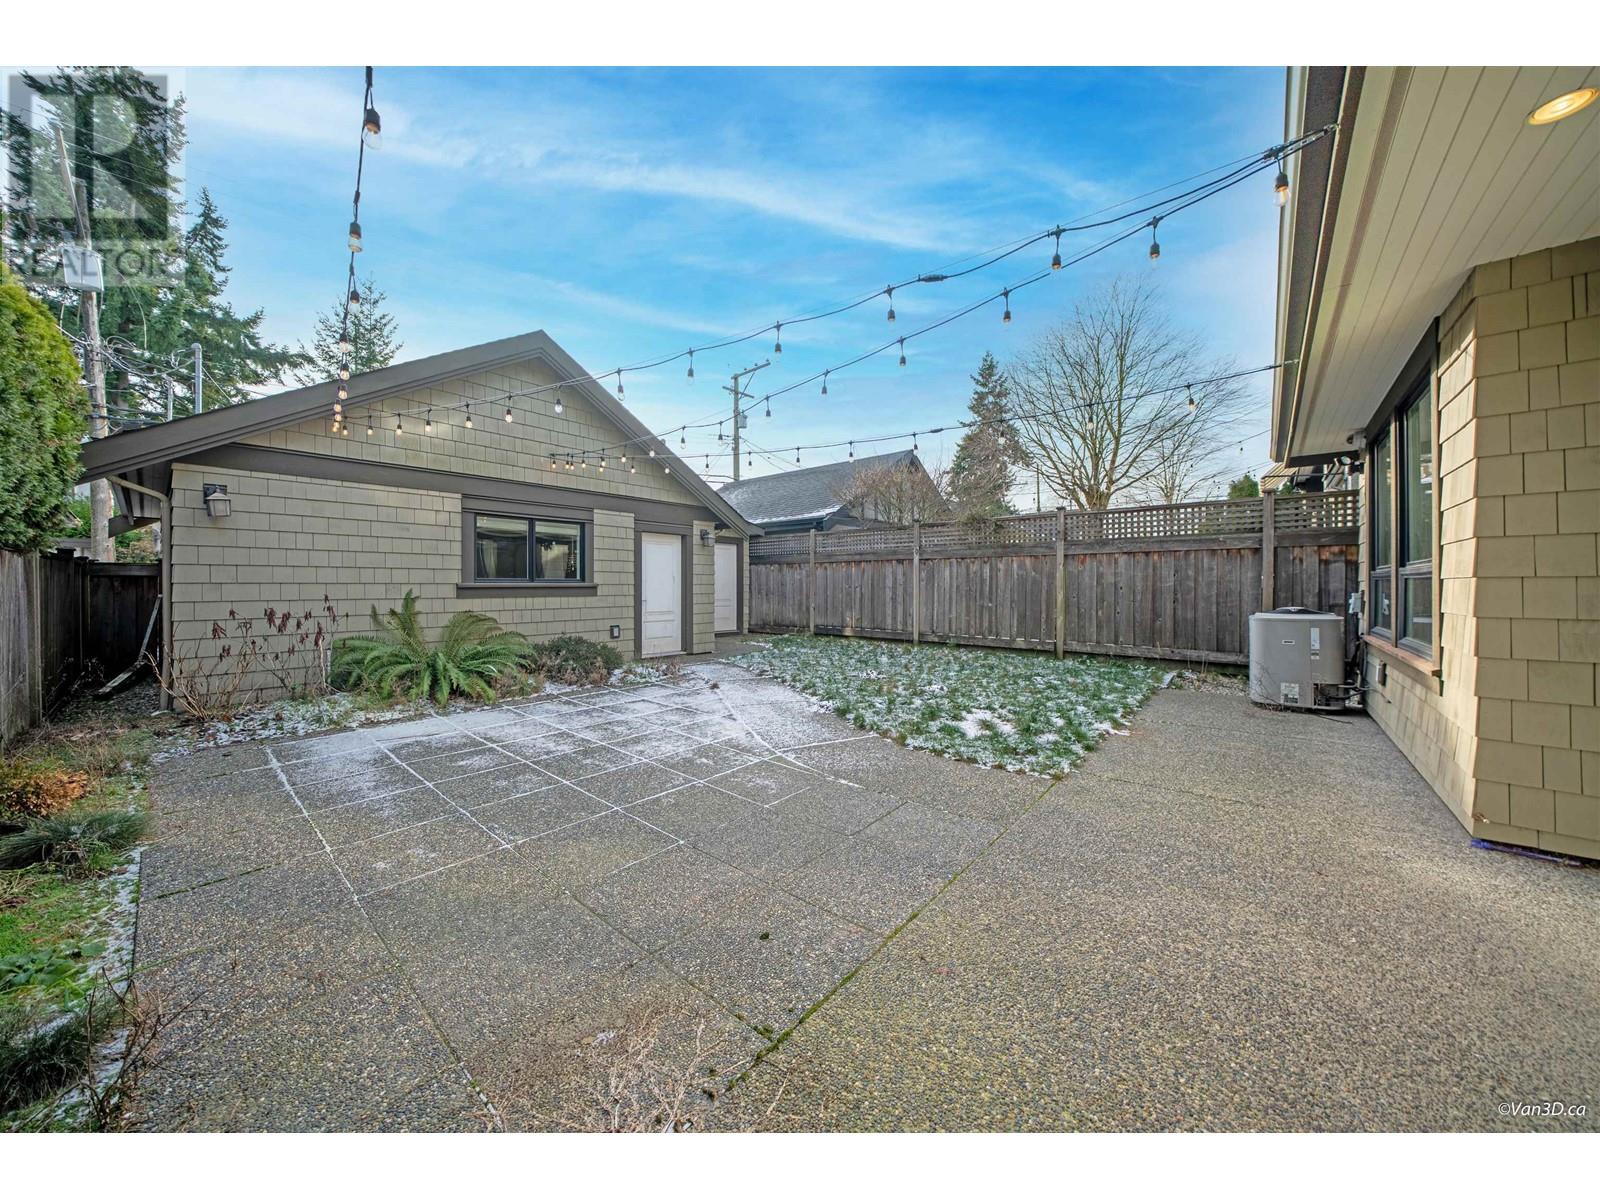 Listing Picture 38 of 40 : 4682 W 6TH AVENUE, Vancouver / 溫哥華 - 魯藝地產 Yvonne Lu Group - MLS Medallion Club Member